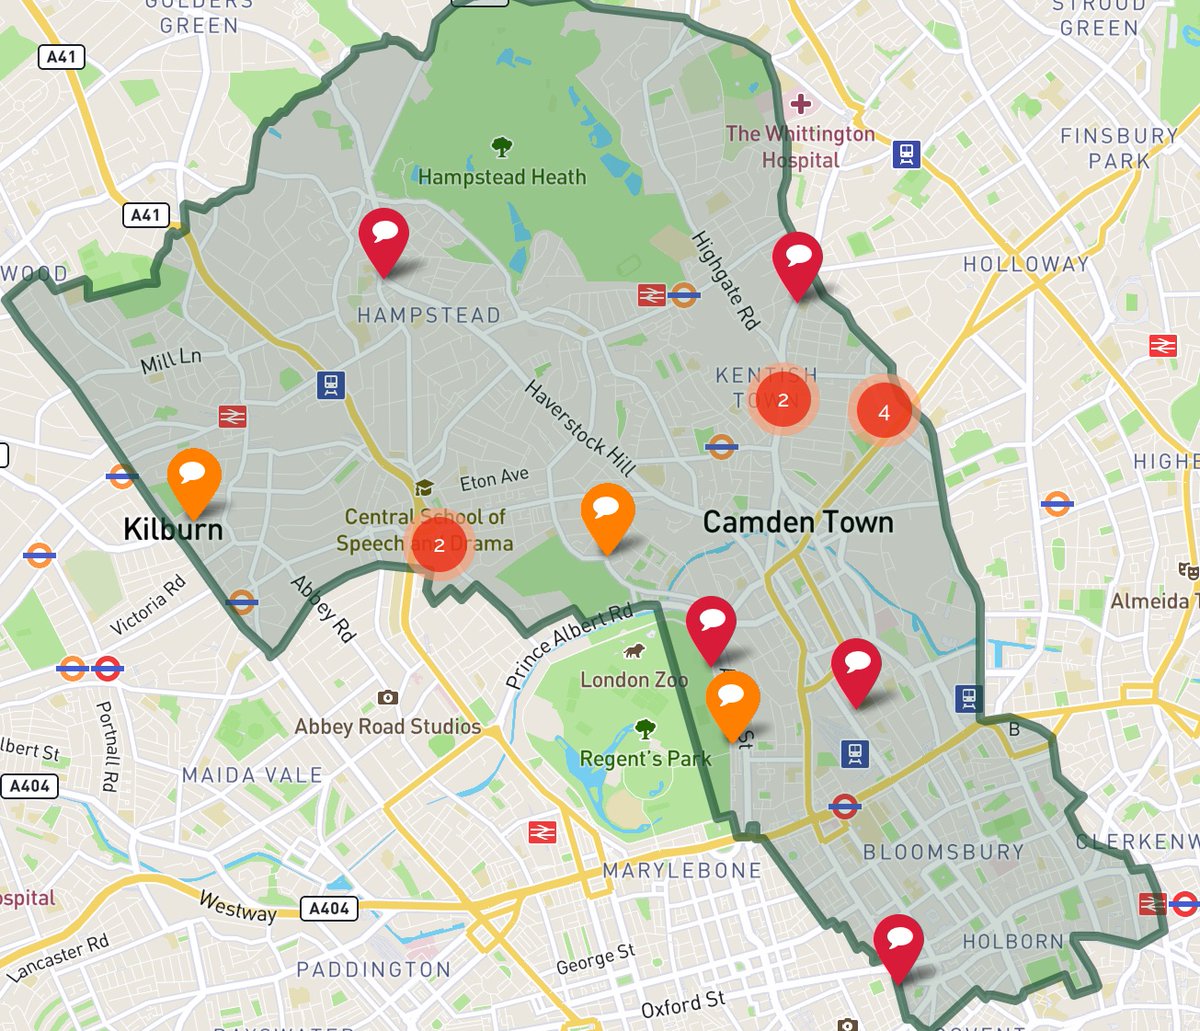 Please head to our Commonplace map, put a pin in it and have your sayWith social distancing set to remain for some time to come, Camden will work to keep people safe from  #covid-19,  #speeding, and  #airpollution. Please join us  https://camdensafetravel.commonplace.is 